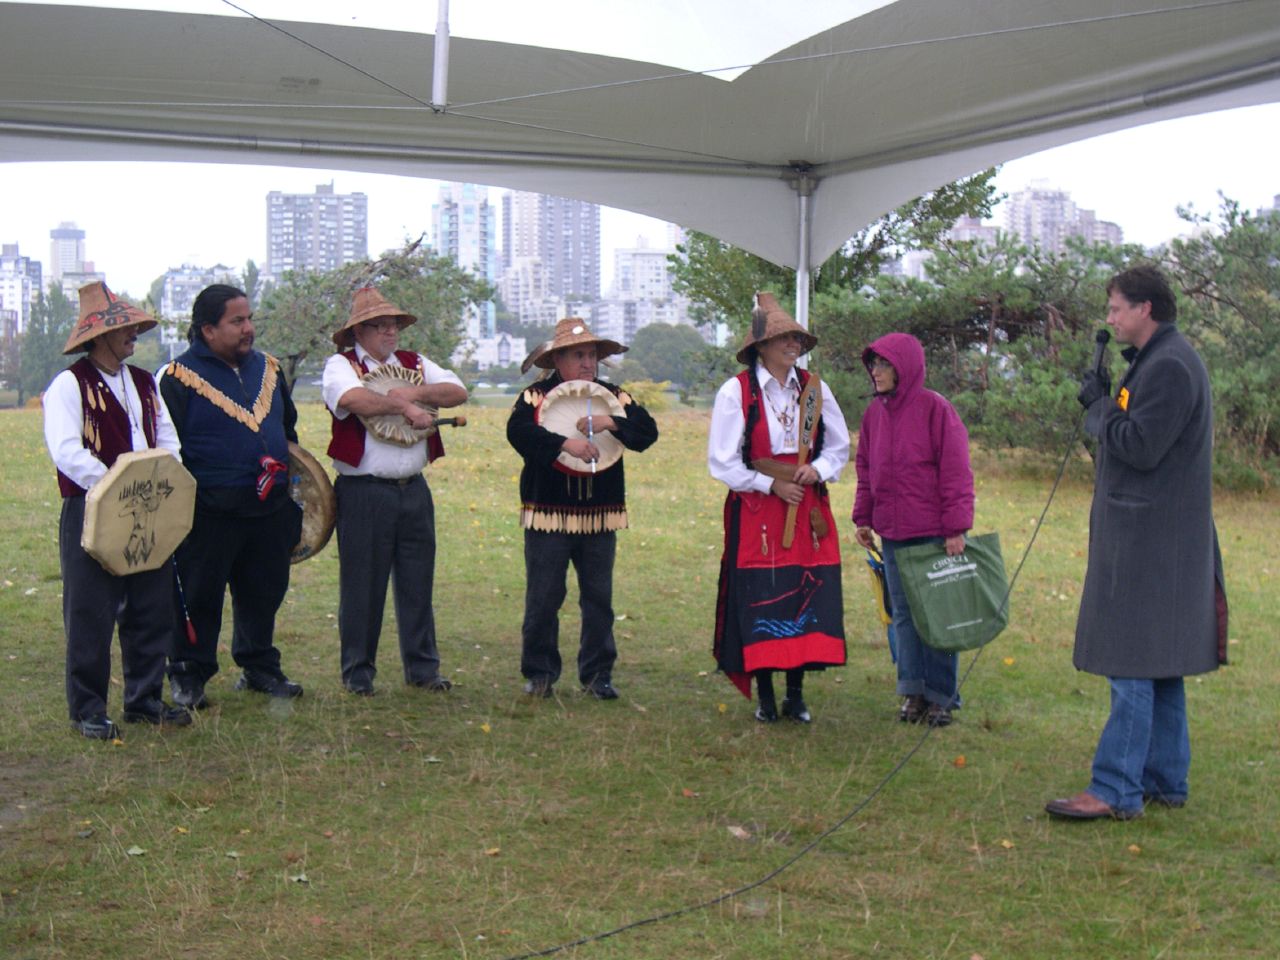 This photo shows a number of people under a tent on a grassy lawn, with bushes to the right. In the background are high-rise buildings. One man is holding a mic. Five people are dressed in traditional clothing and four of them are holding hand drums. Four of the performers are wearing bell-shaped hats woven from cedar bark.